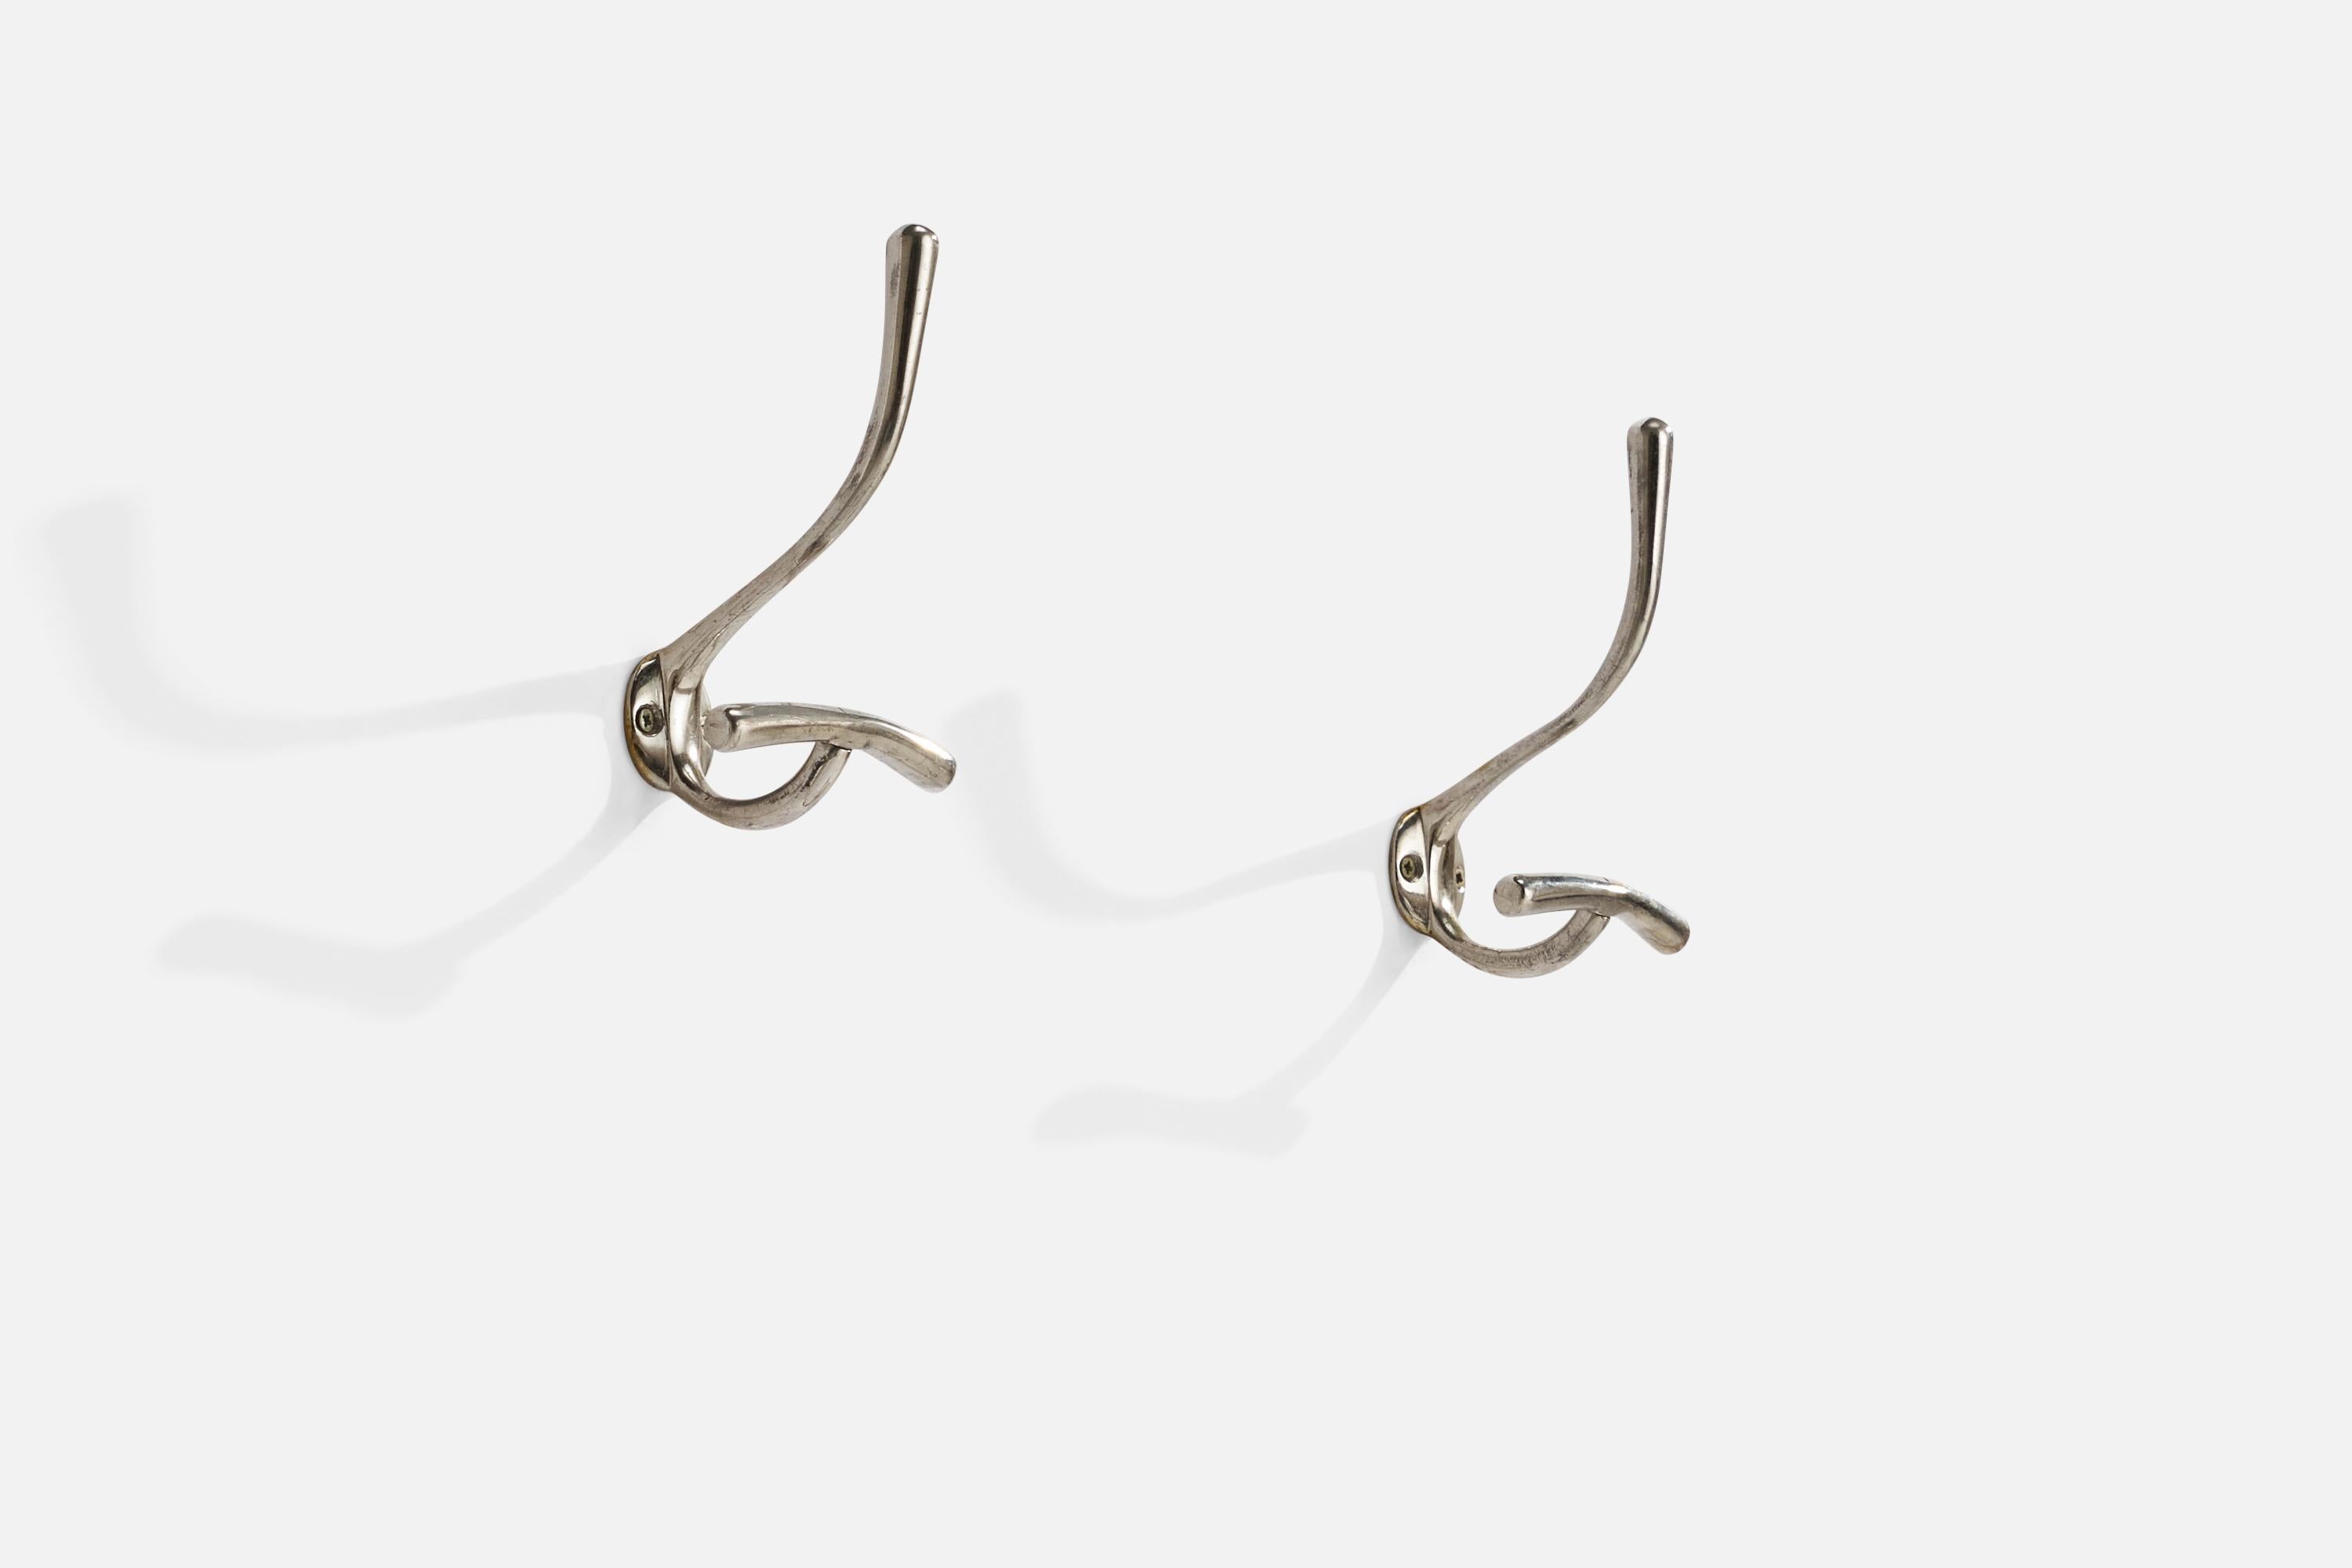 A pair of nickel-plated brass wall hangers designed by Luigi Caccia Dominioni and produced by Azucena, Italy, 1950s.